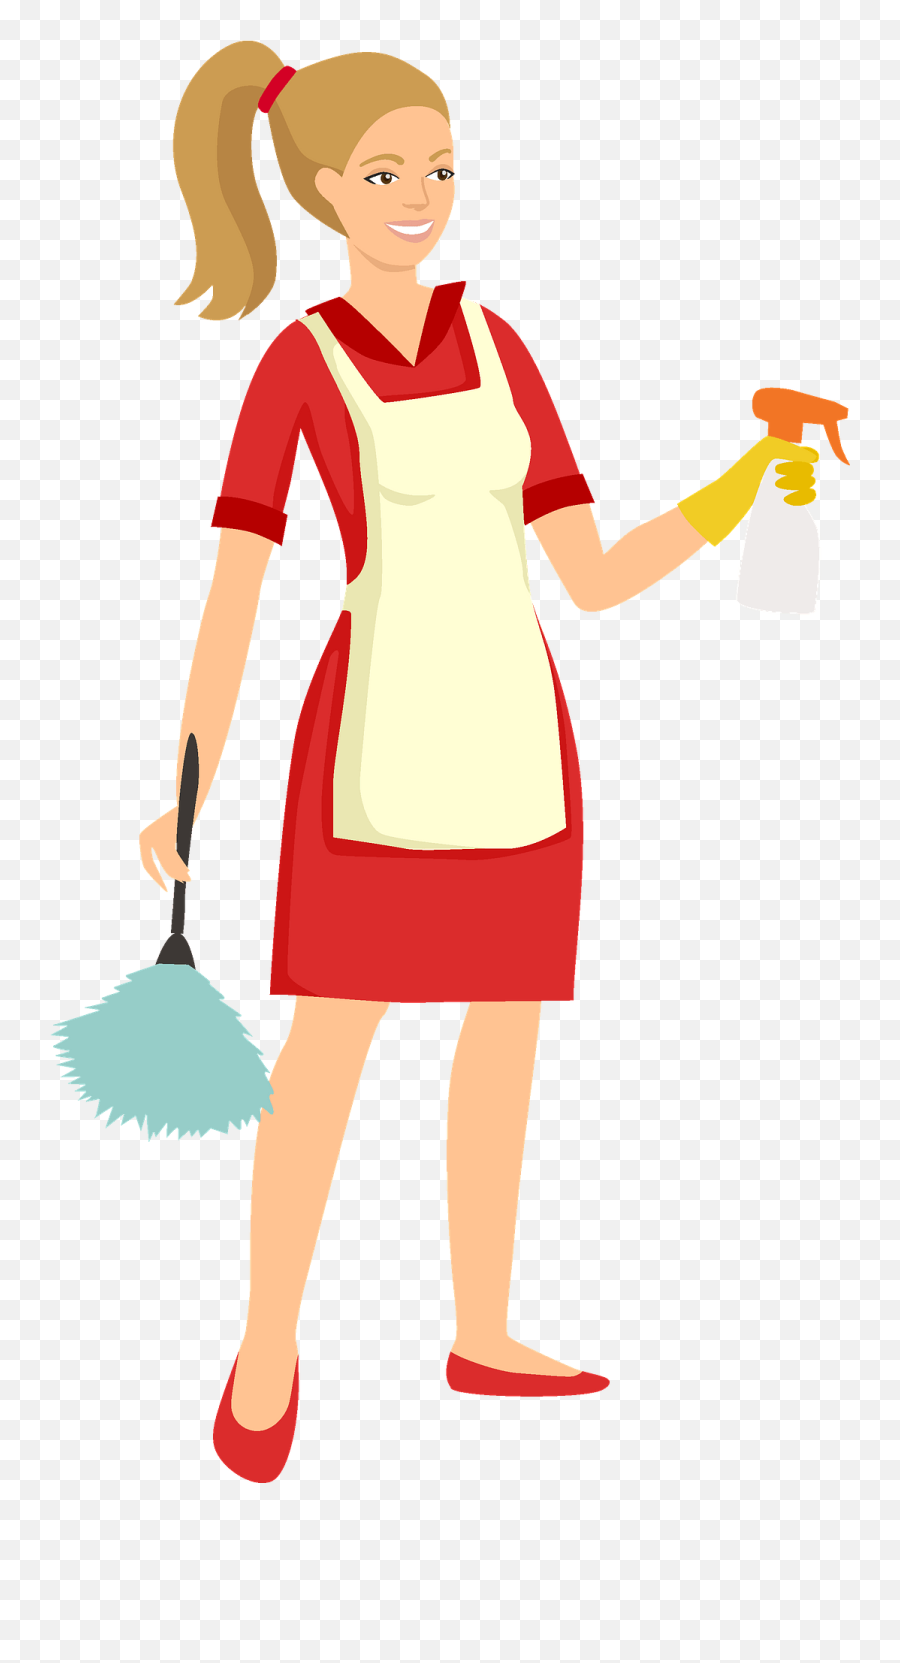 Cleaning Lady Clipart - Cleaning Lady Clipart Transparent Emoji,Cleaning Clipart